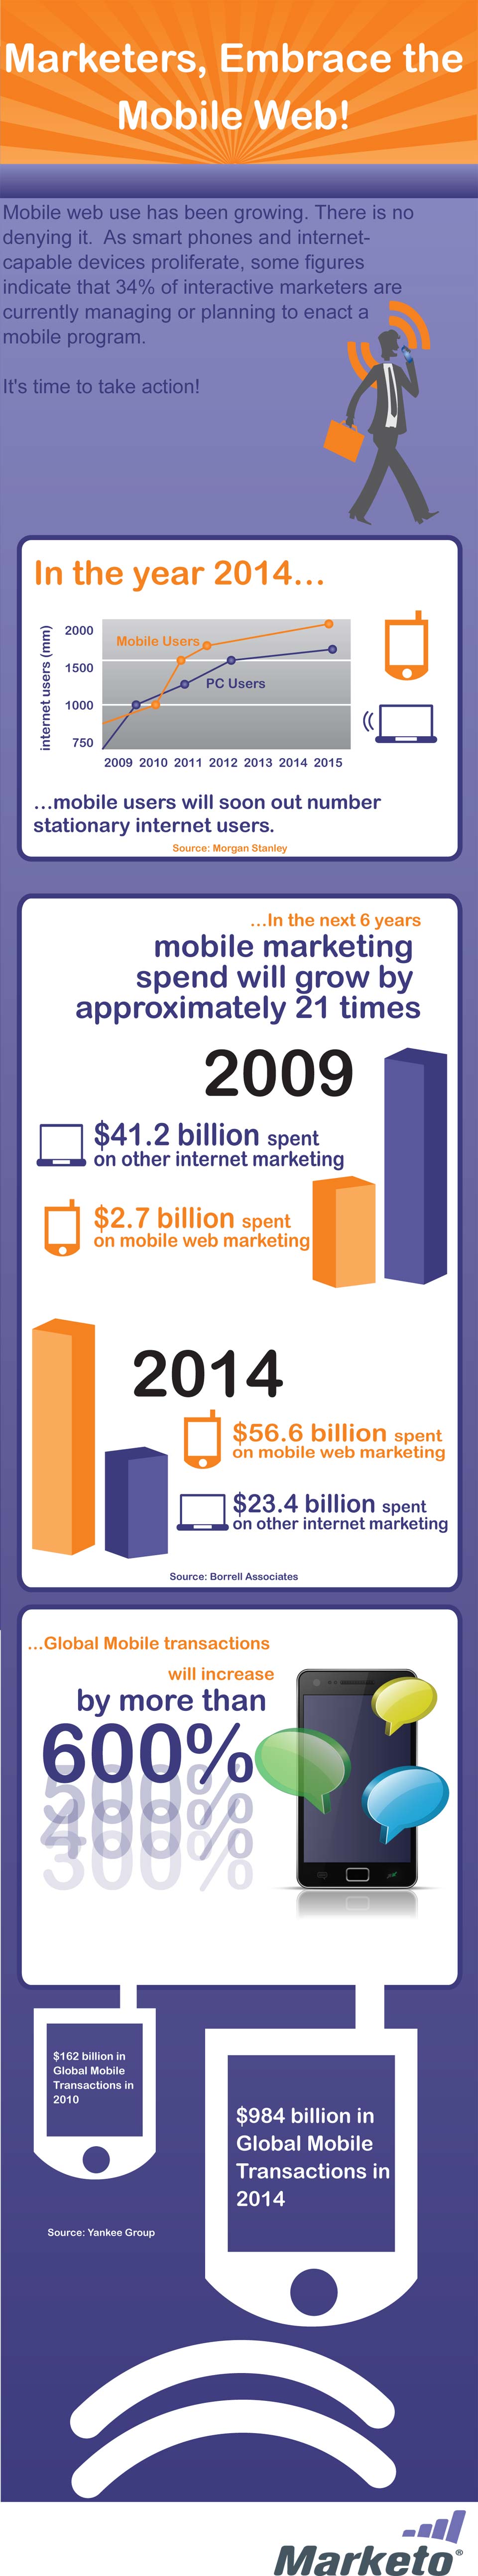 Embrace the Mobile Web Infographic by Marketo